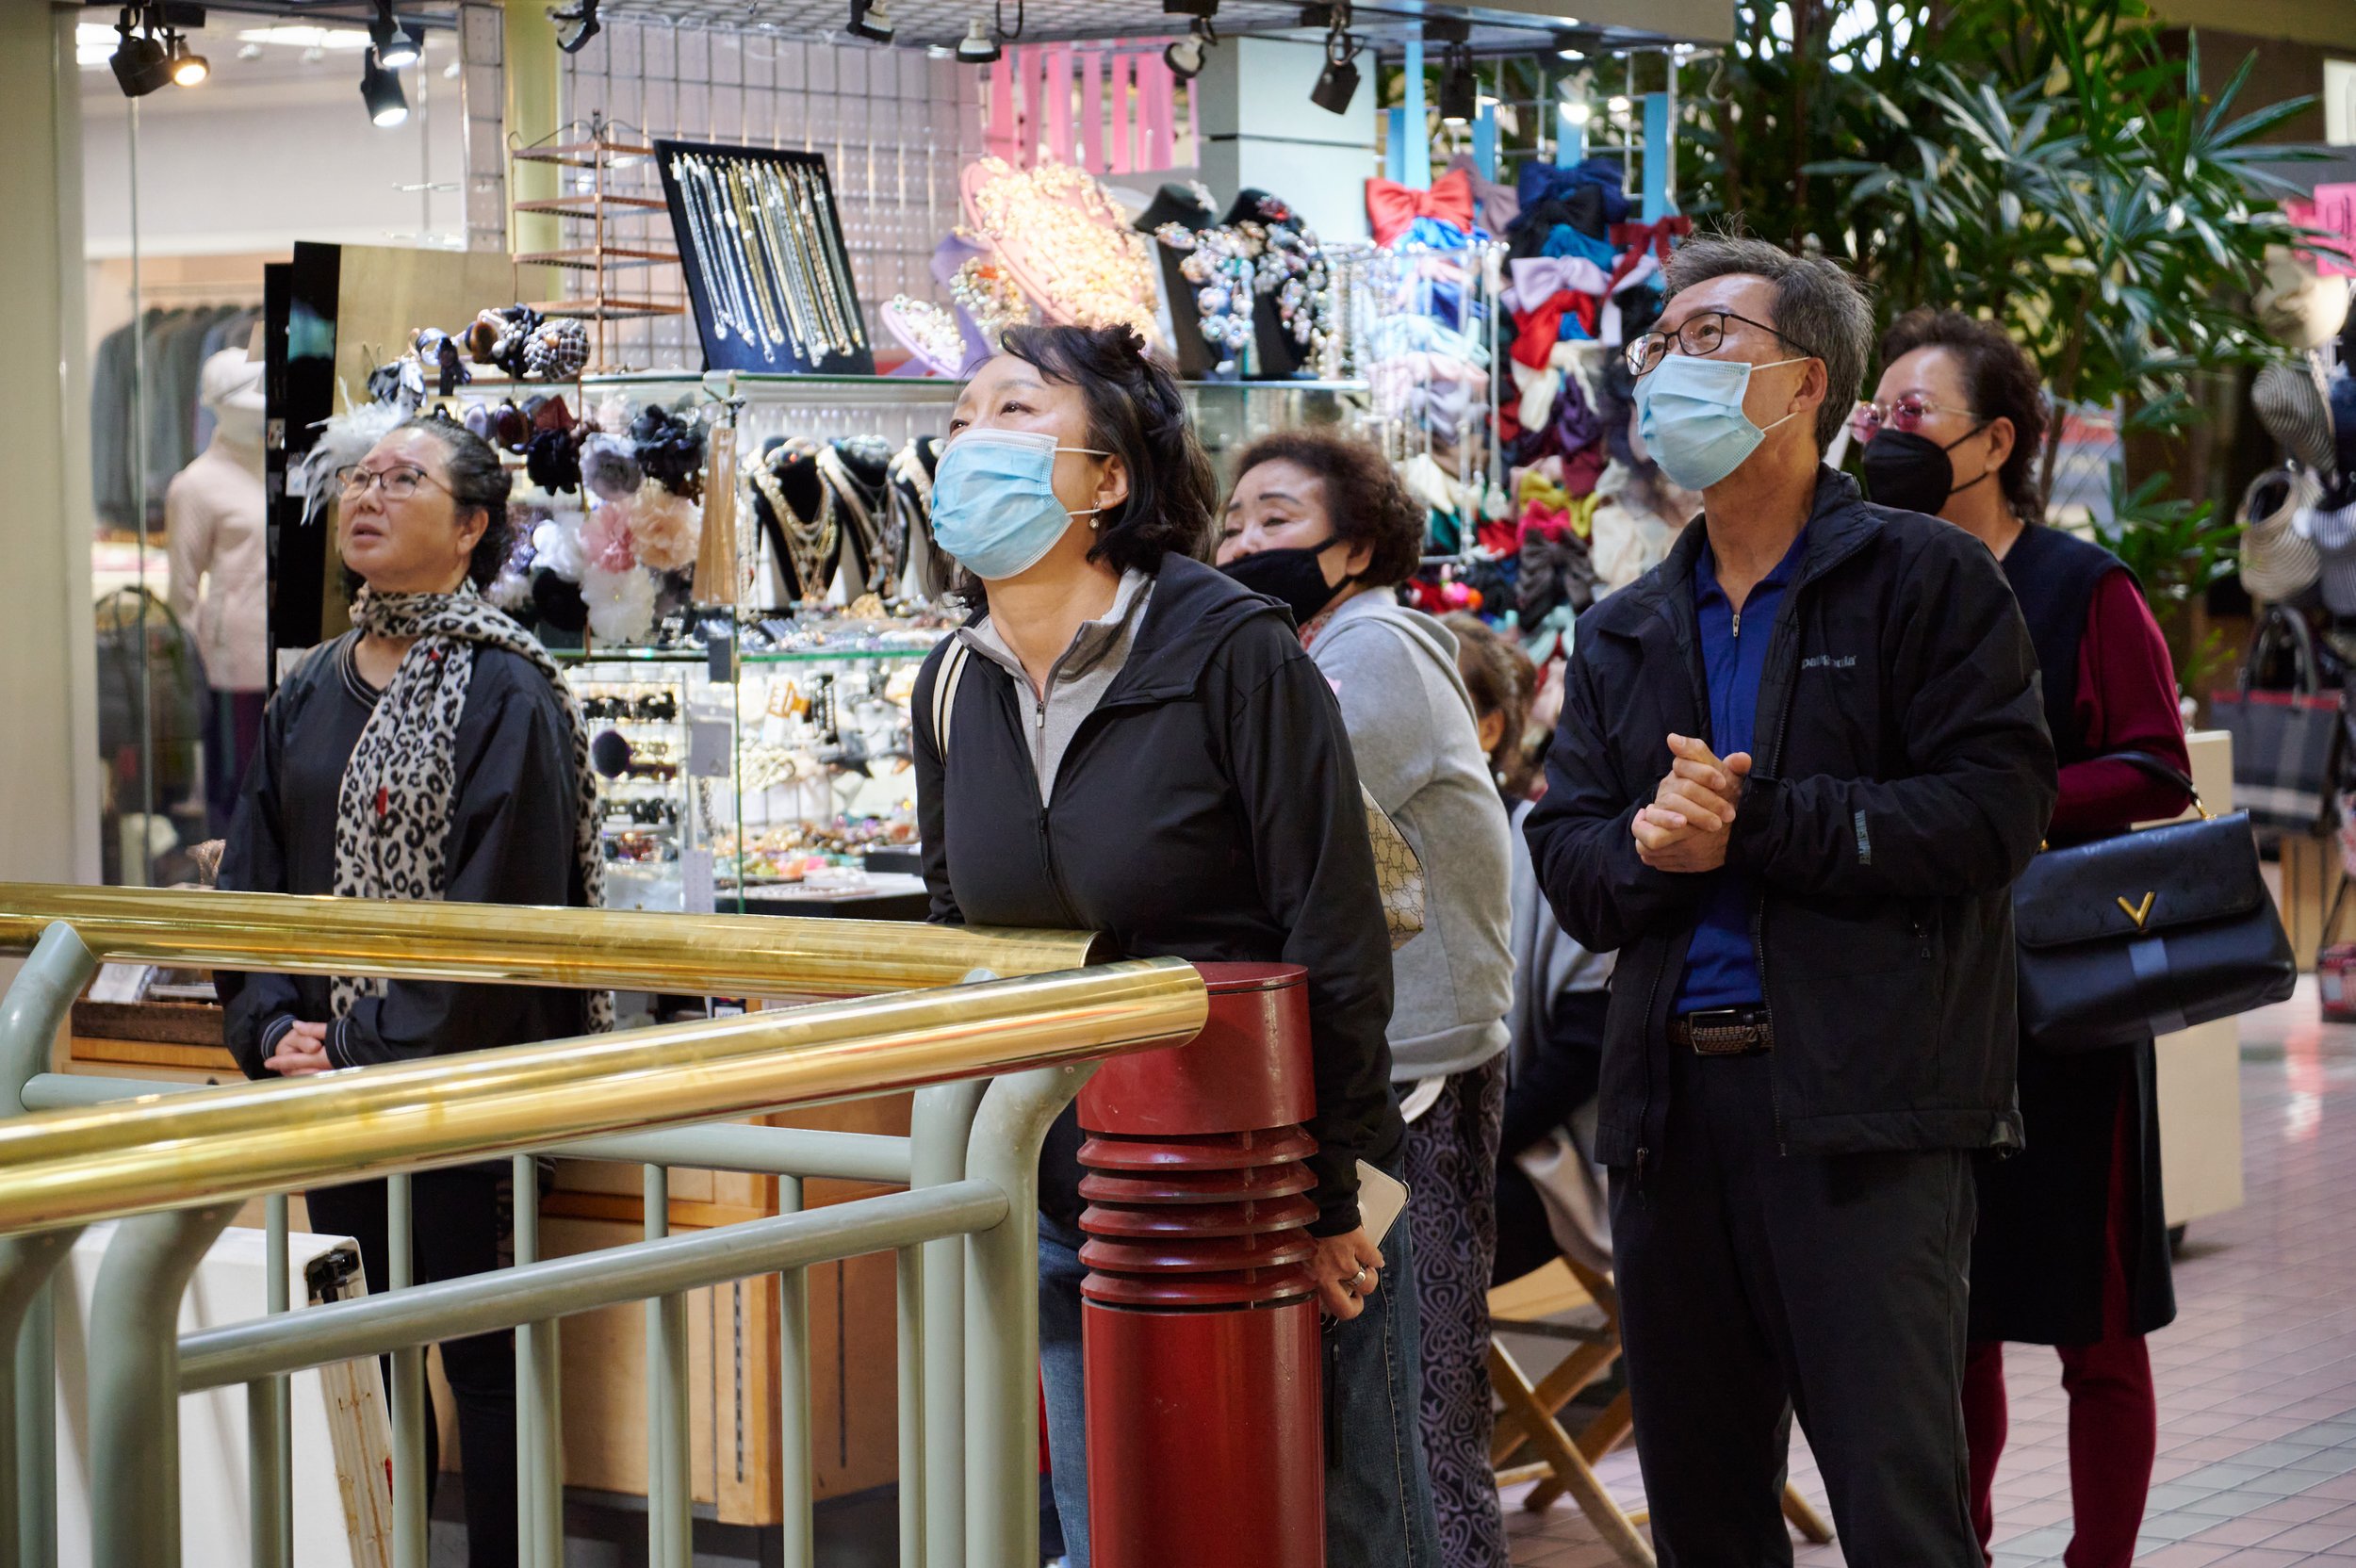  People watch the World Cup match between South Korea and Brazil at the Koreatown Community World Cup Viewing Party at Koreatown Plaza on Monday, Dec. 5, 2022, in Los Angeles, Calif. (Nicholas McCall | The Corsair) 